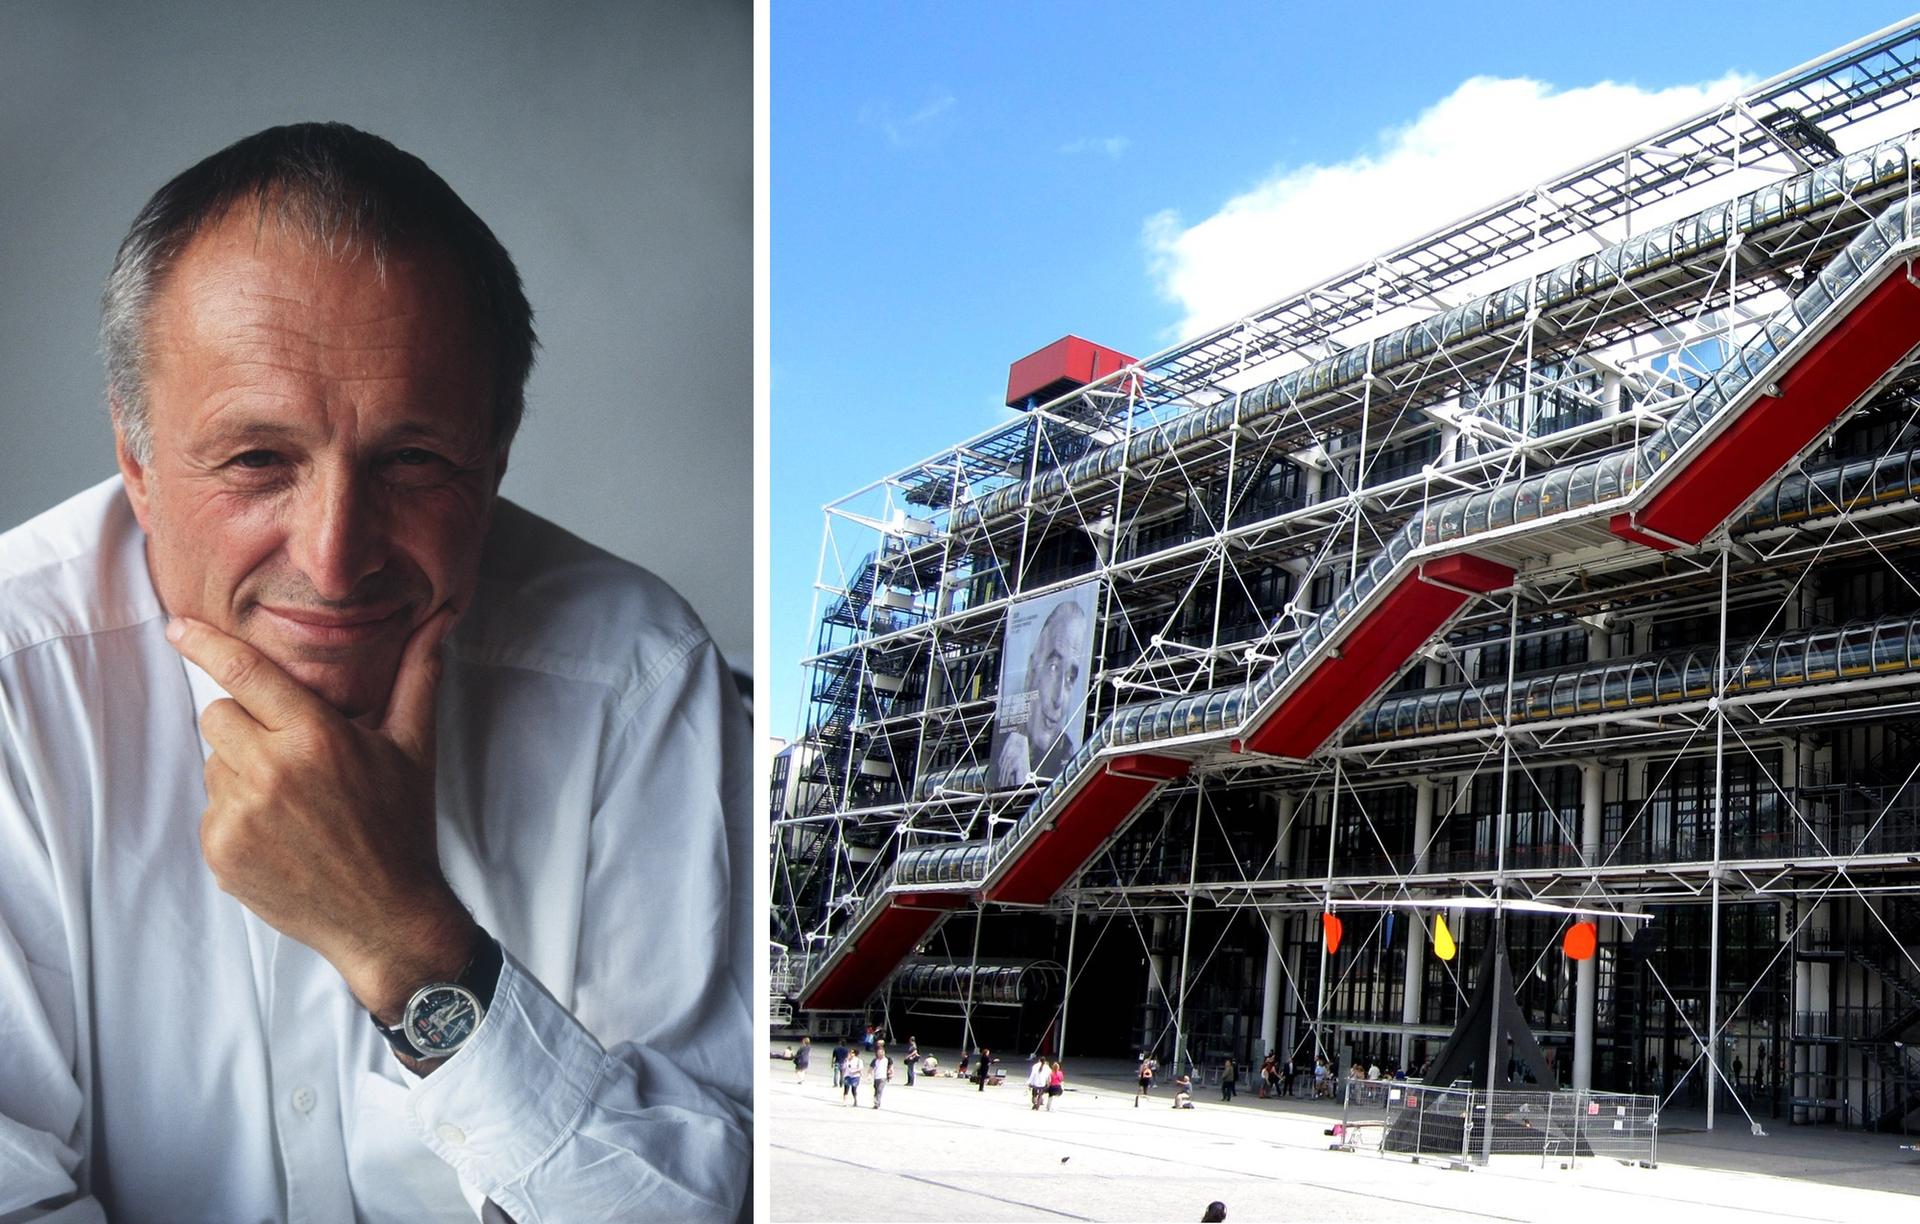 Richard Rogers (left) co-designed the Centre Pompidou in Paris (right), which opened to the public in 1977 Rogers: Terry Fincher. Photo: Int / Alamy Stock Photo; Pompidou: Oh Paris